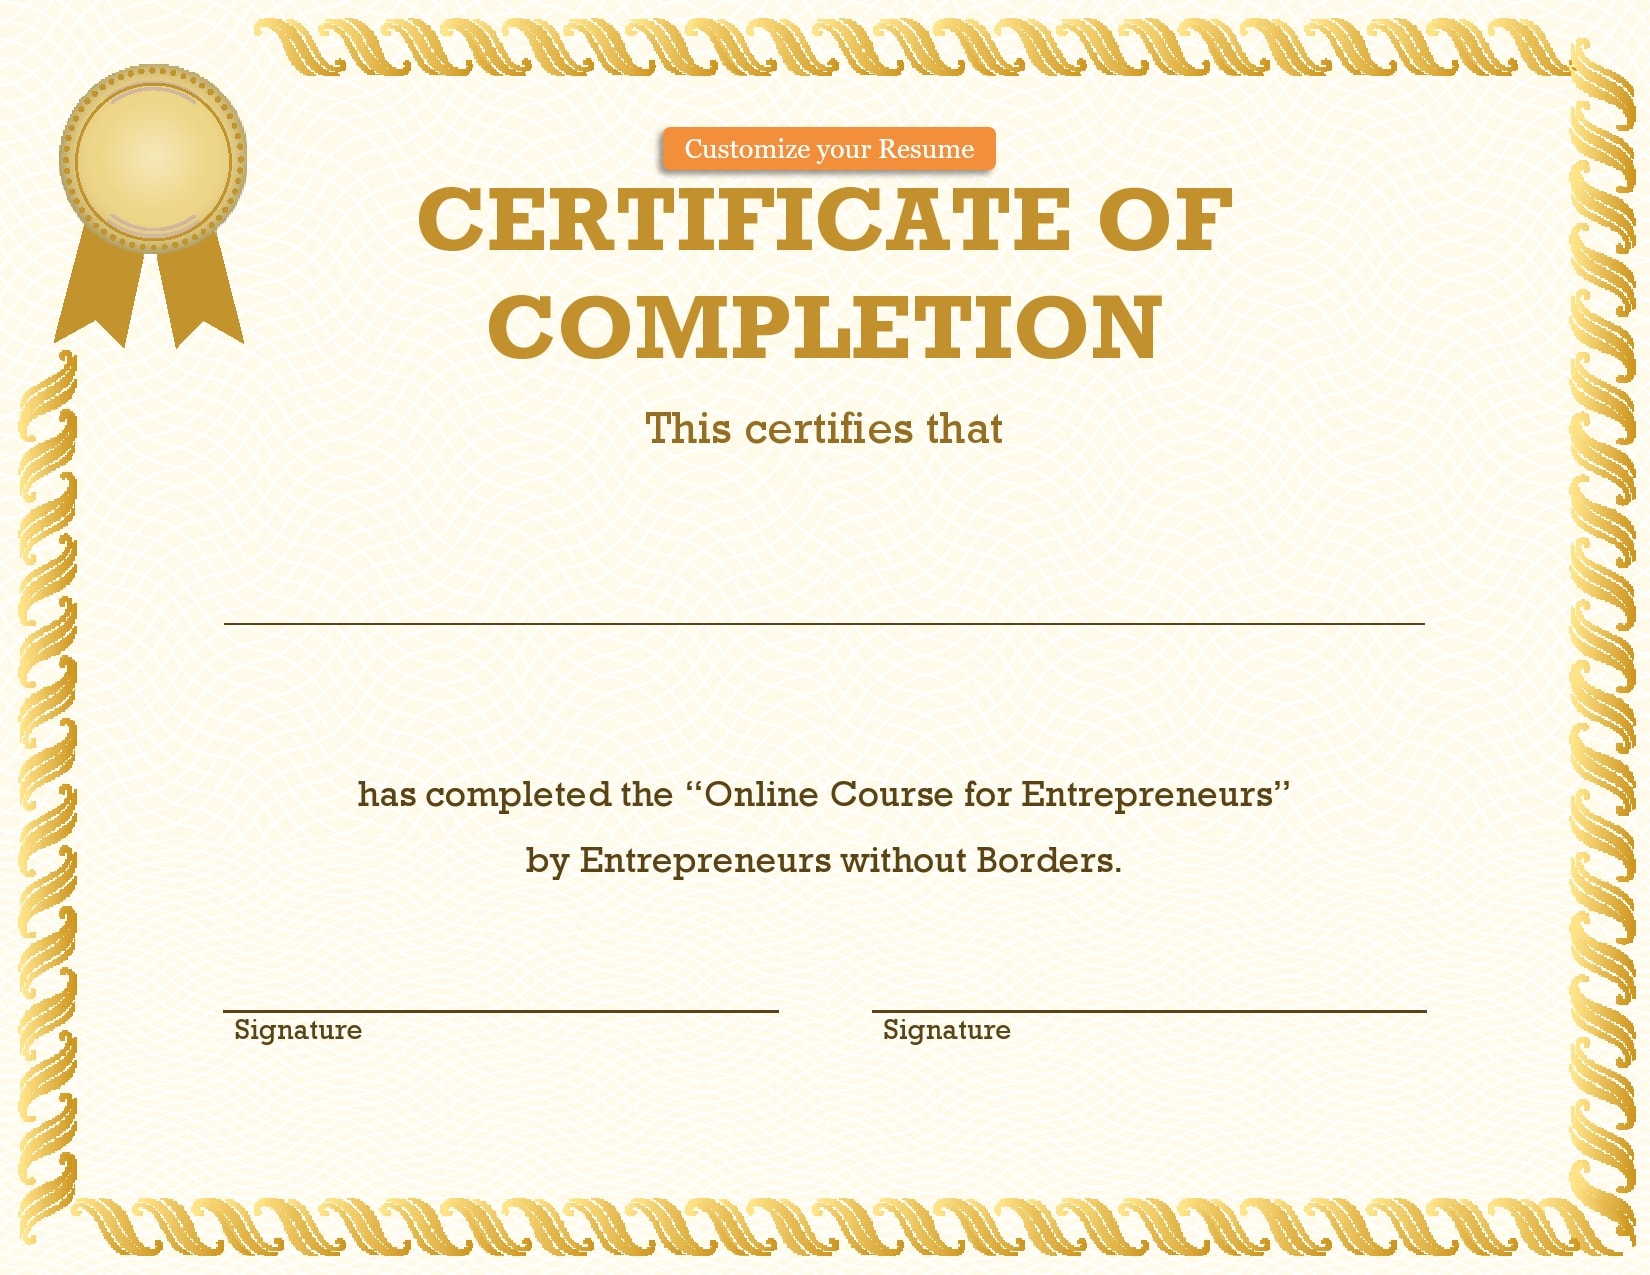 29 Great Certificate Of Completion Templates 100 FREE 